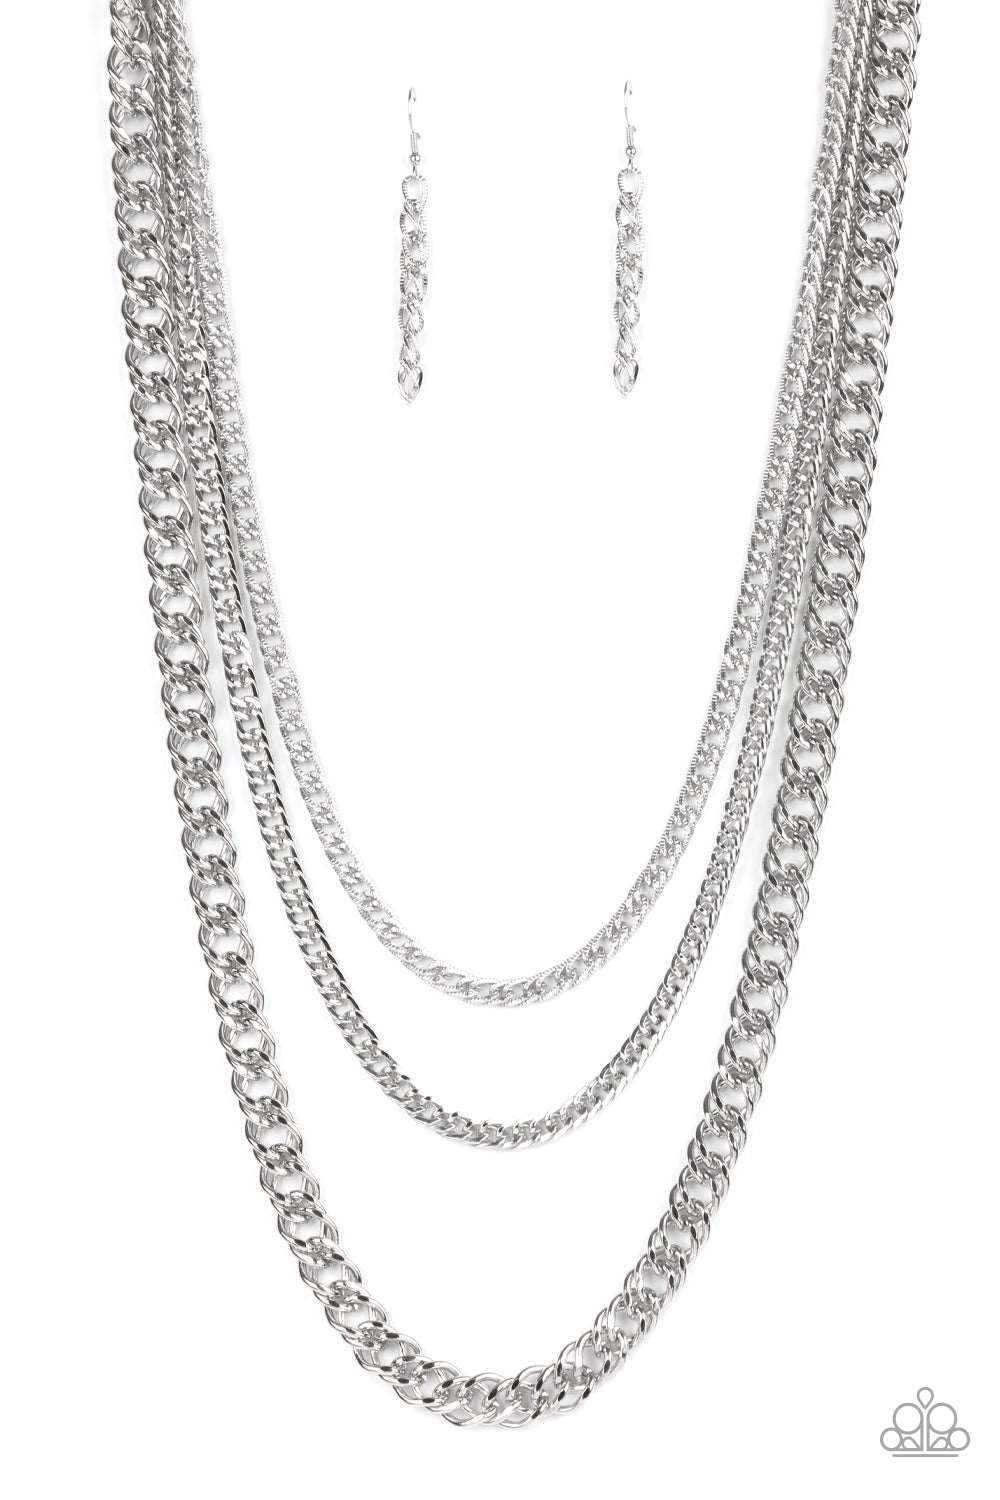 A46 - Chain Of Champions, Silver Paparazzi Necklace by Paparazzi Accessories on Fancy5Fashion.com